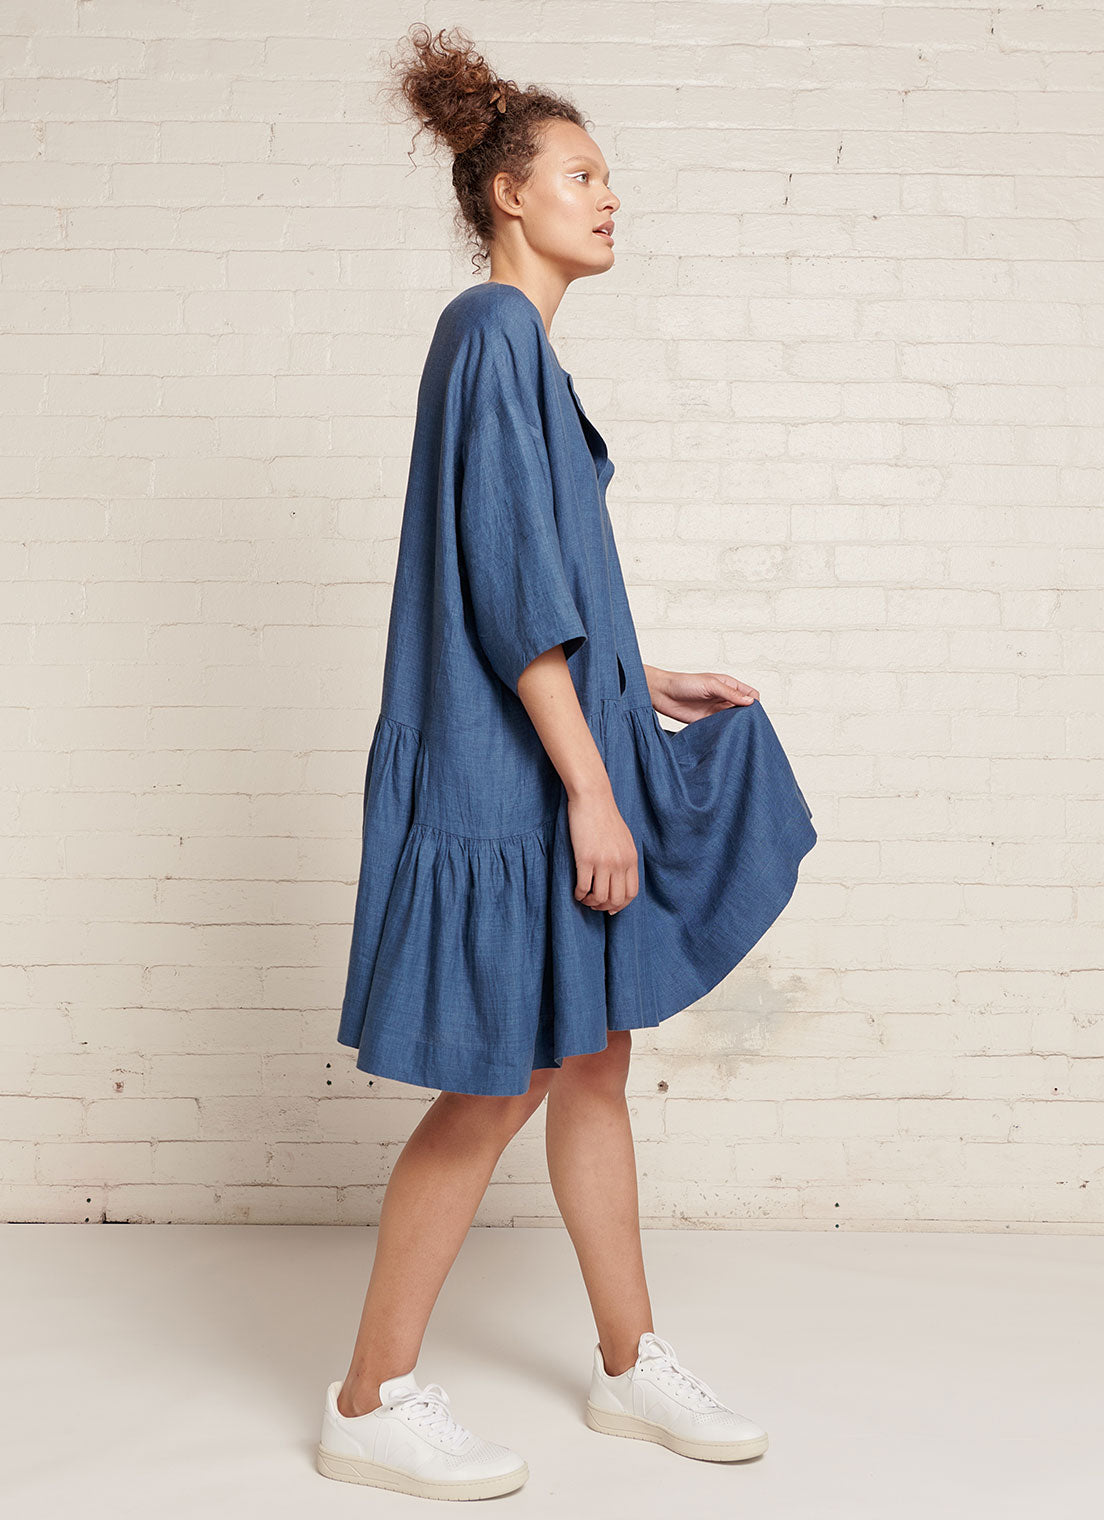 An indigo, easy fit, knee-length, square-cut dress with open neckline, 3/4 sleeves, and gathered detailing made from yarn dye washed linen